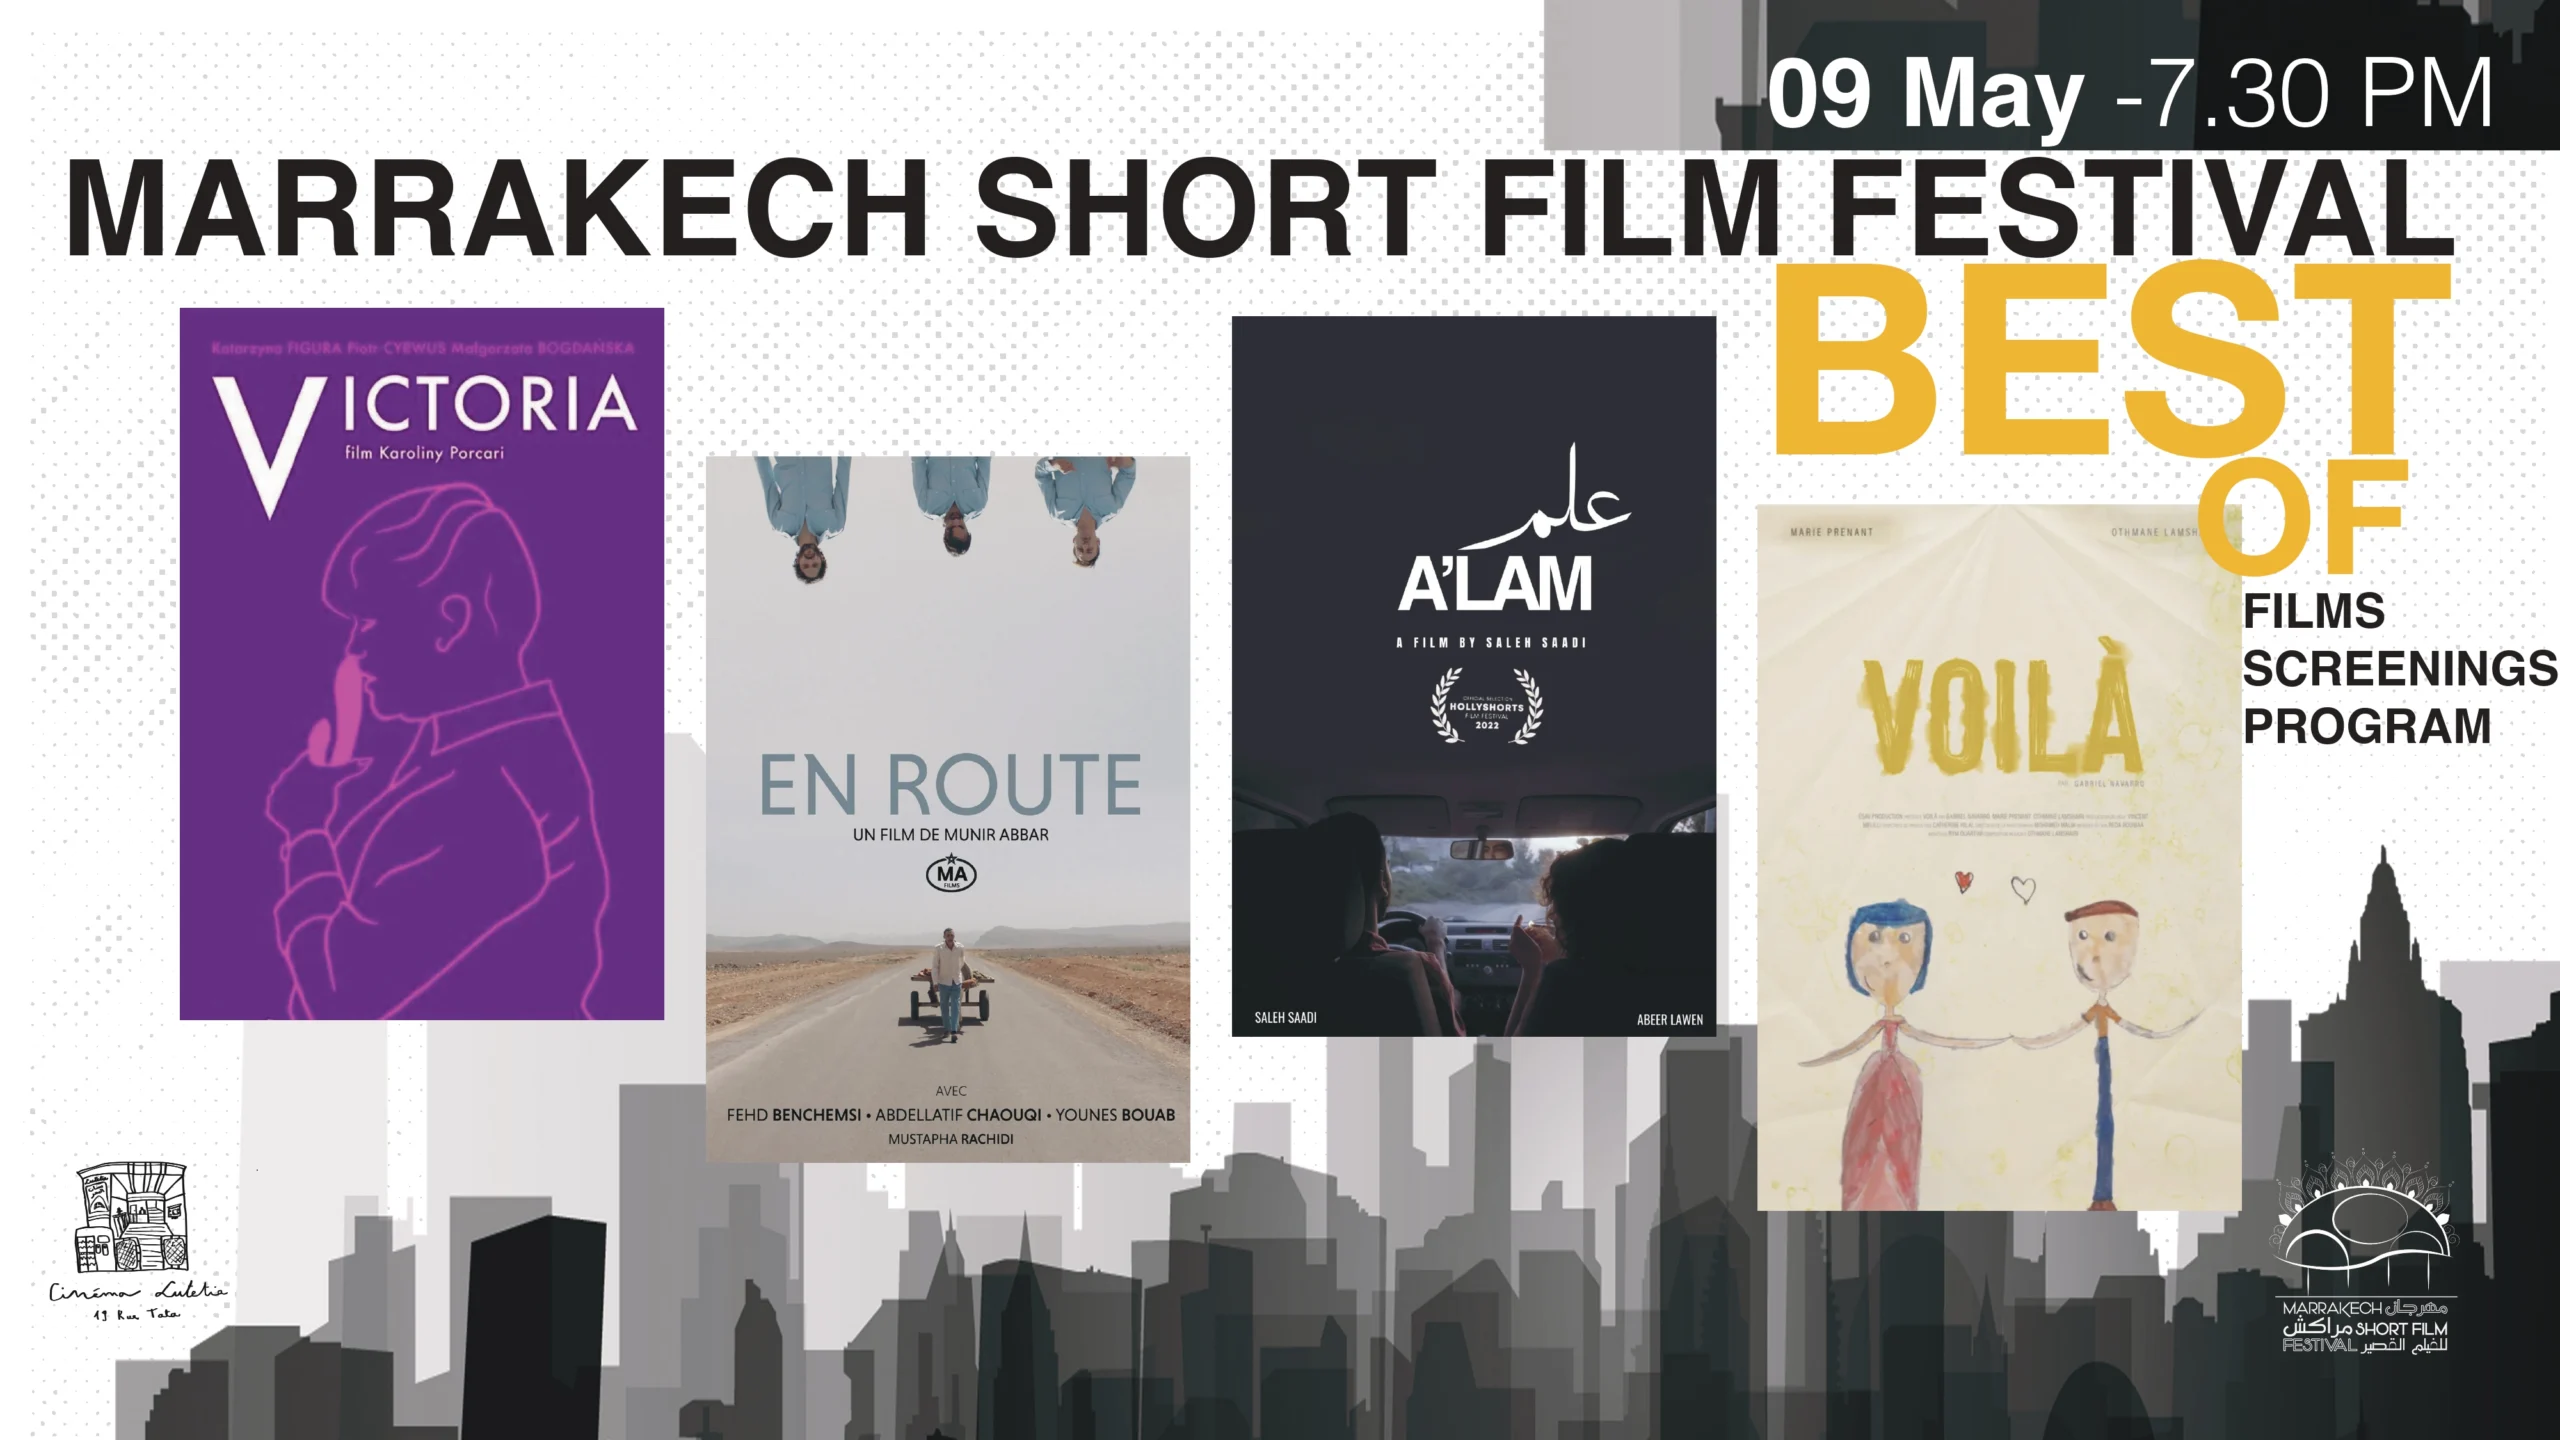 THE MARRAKECH SHORT FILM FESTIVAL IN MOROCCO’S MYTHICAL FILM THEATERS